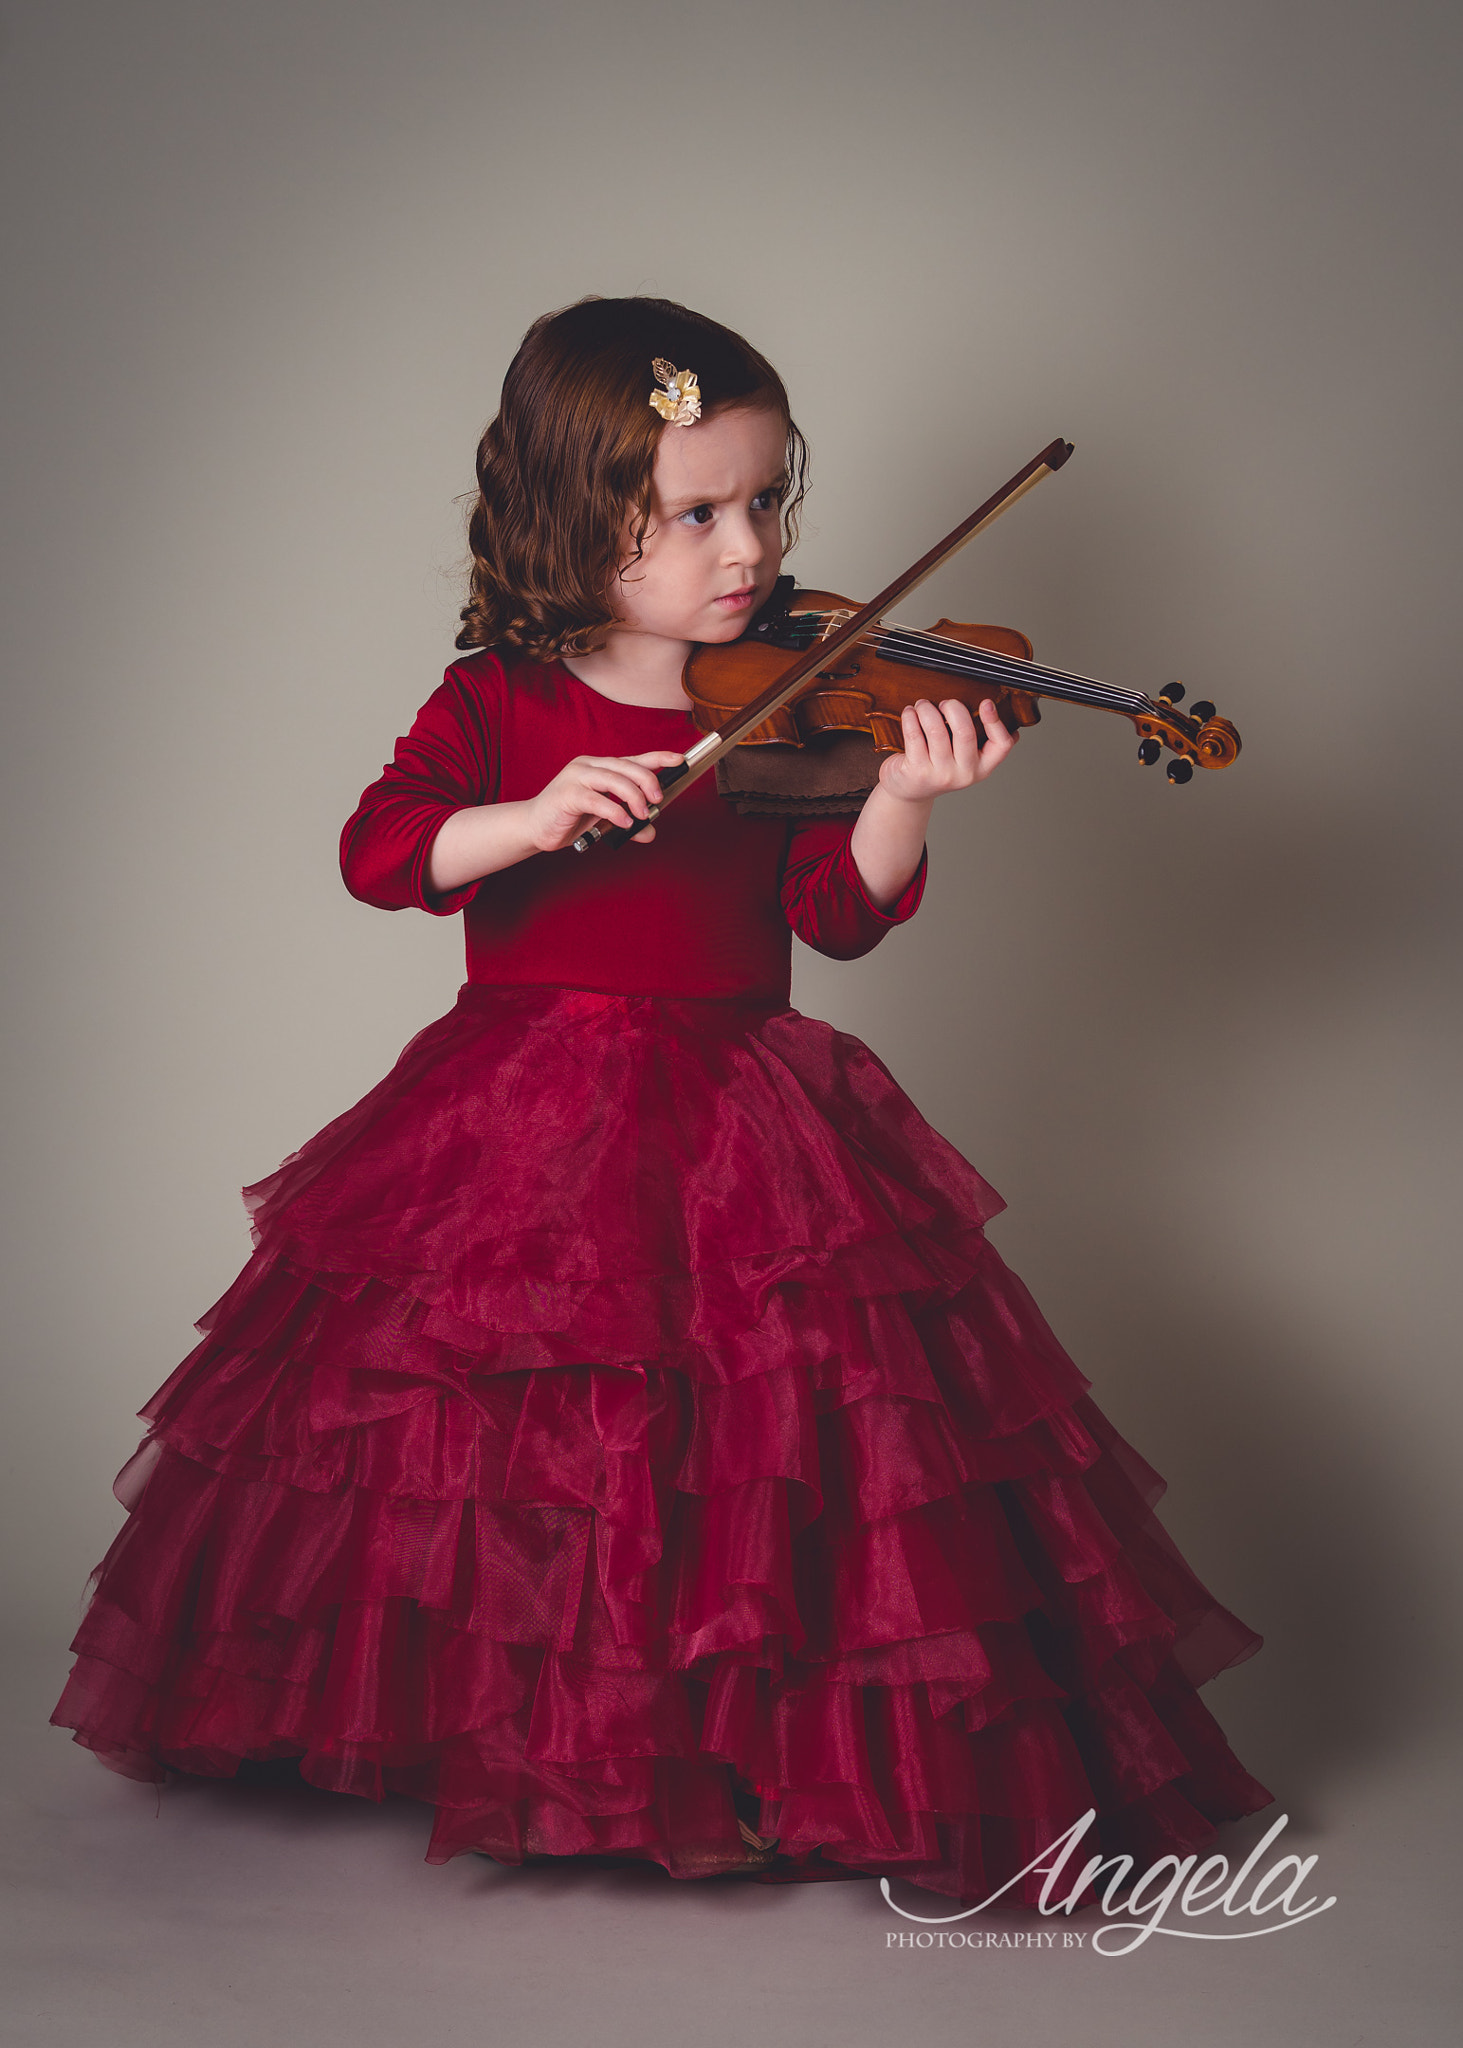 Sigma 50-100mm F1.8 DC HSM Art sample photo. The little violinist photography